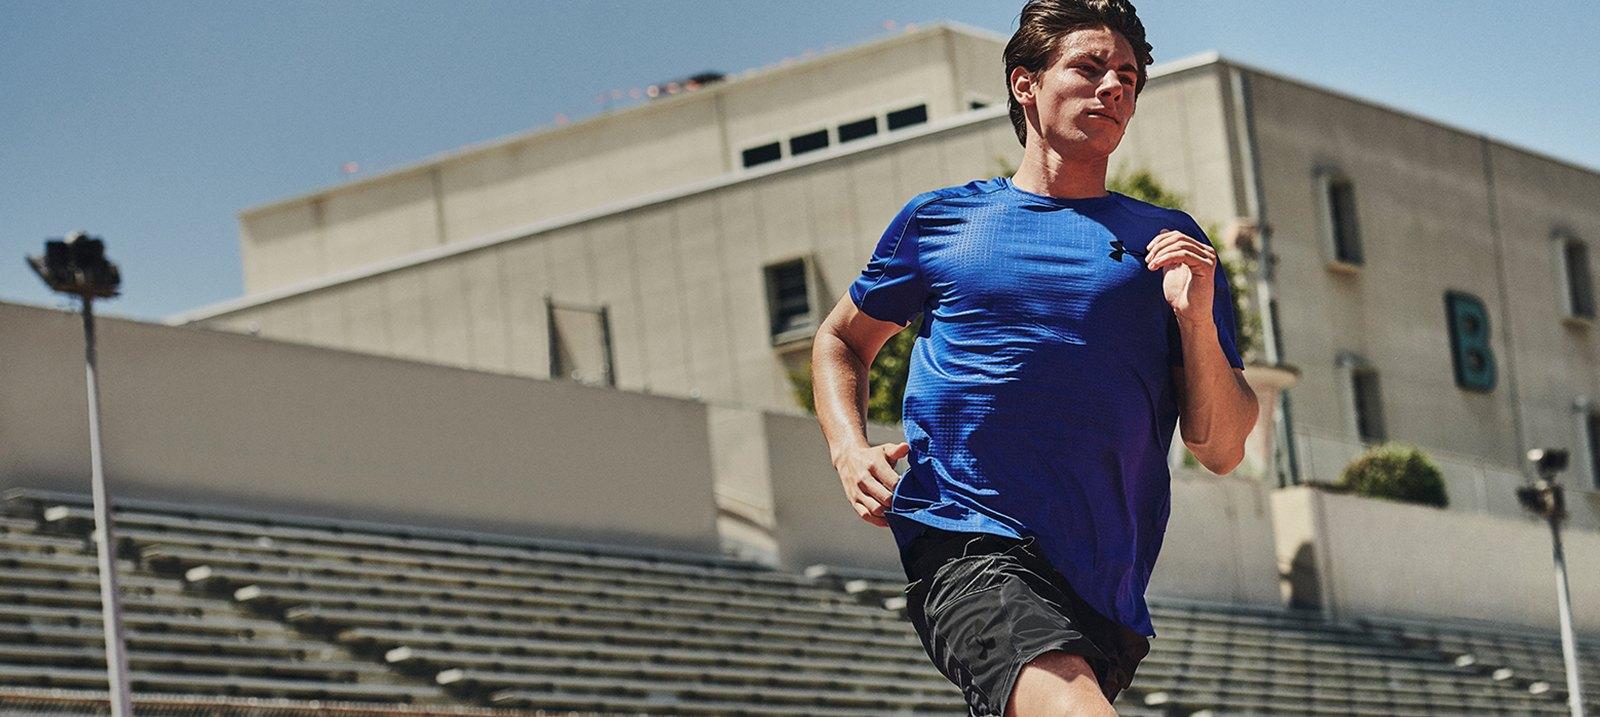 Under Armour: Men's Running and other sports